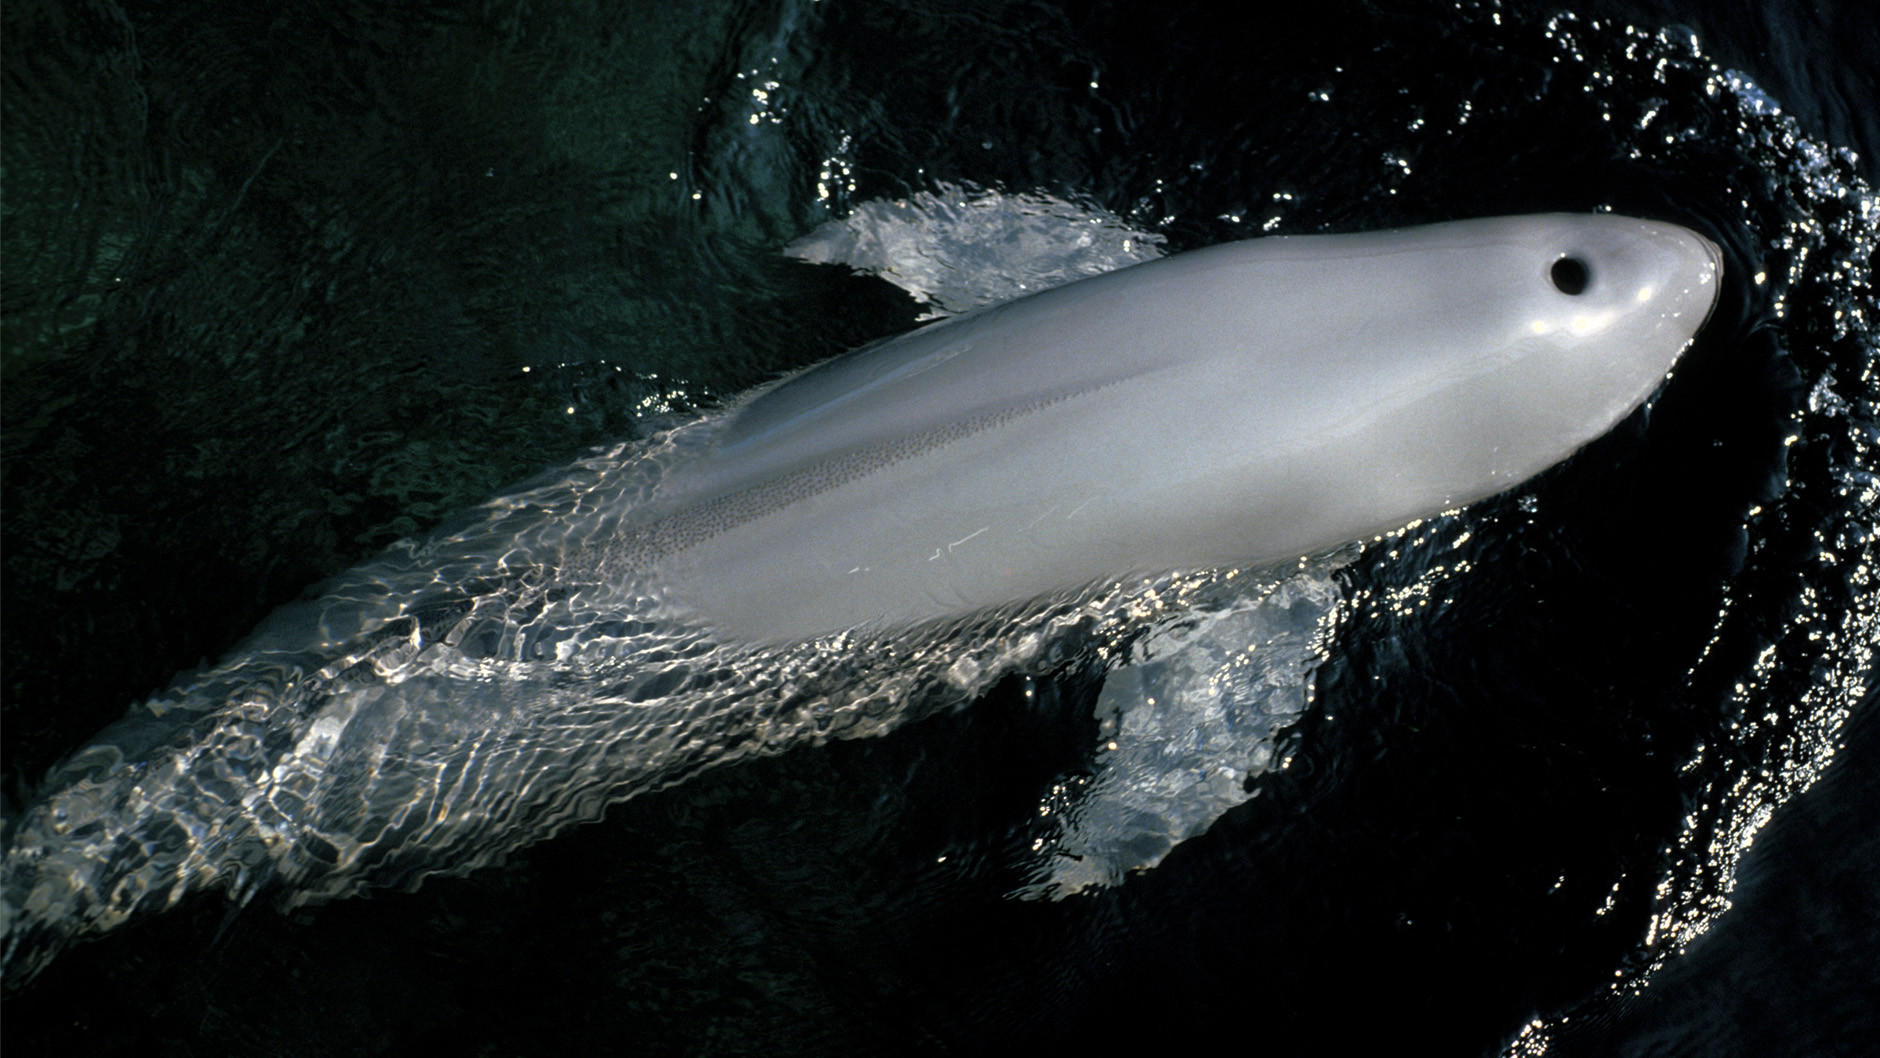 A finless porpoise on the surface, seen from above